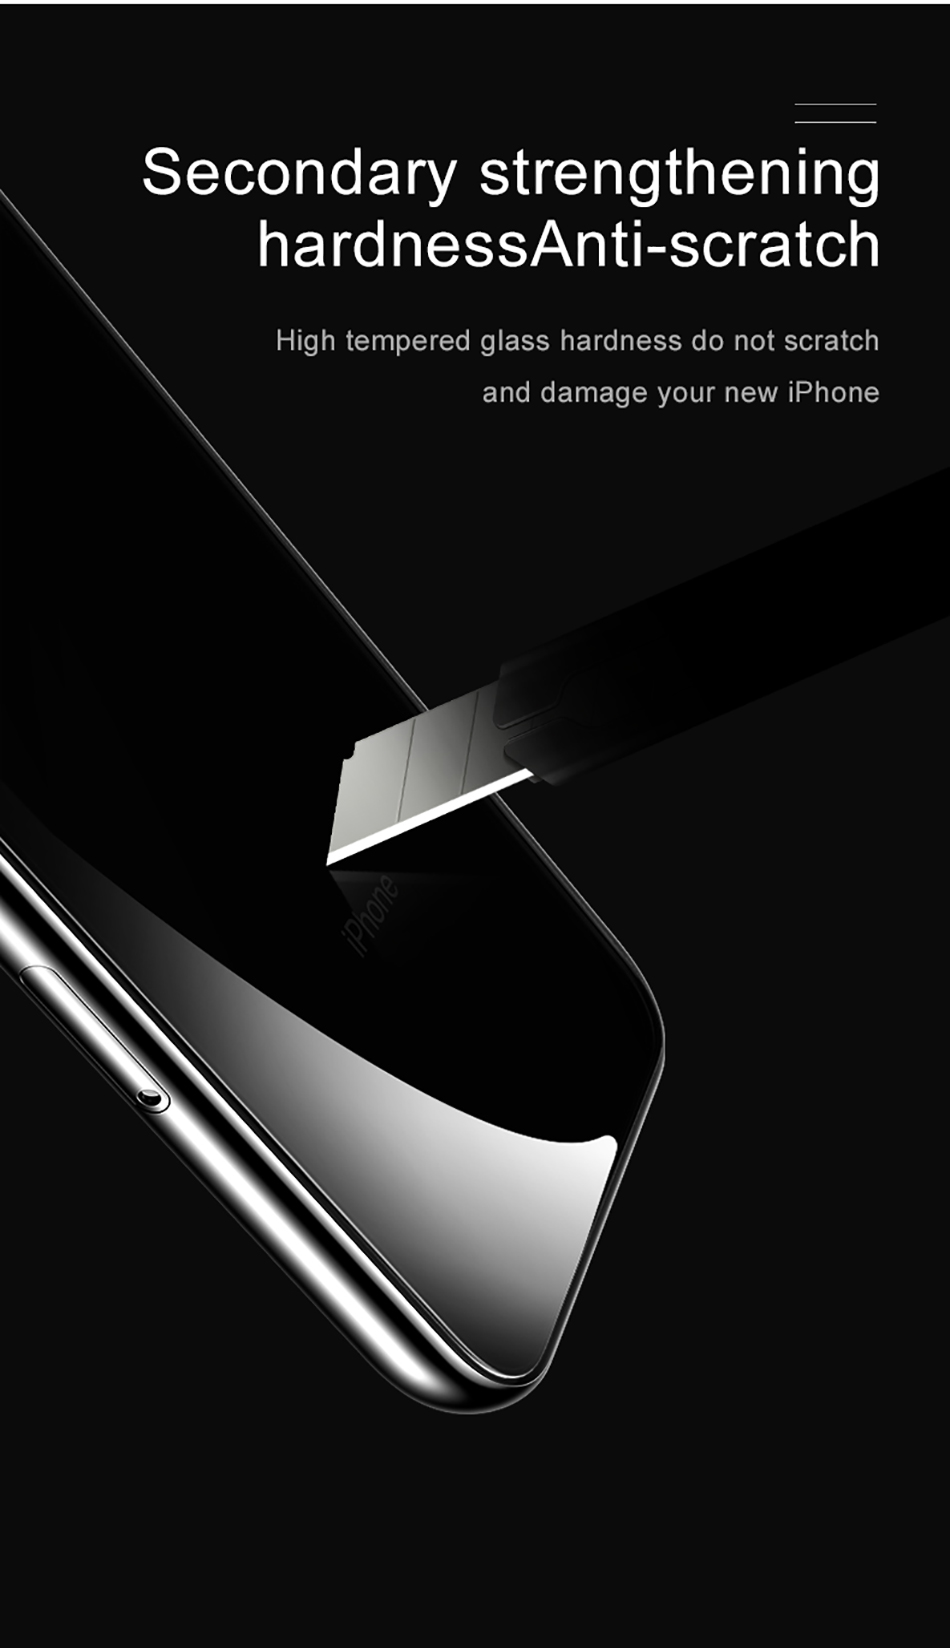 Baseus-Clear-Back-Glass-Protector-For-iPhone-XR-03mm-Scratch-Resistant-Anti-Fingerprint-All-Glass-1370400-6